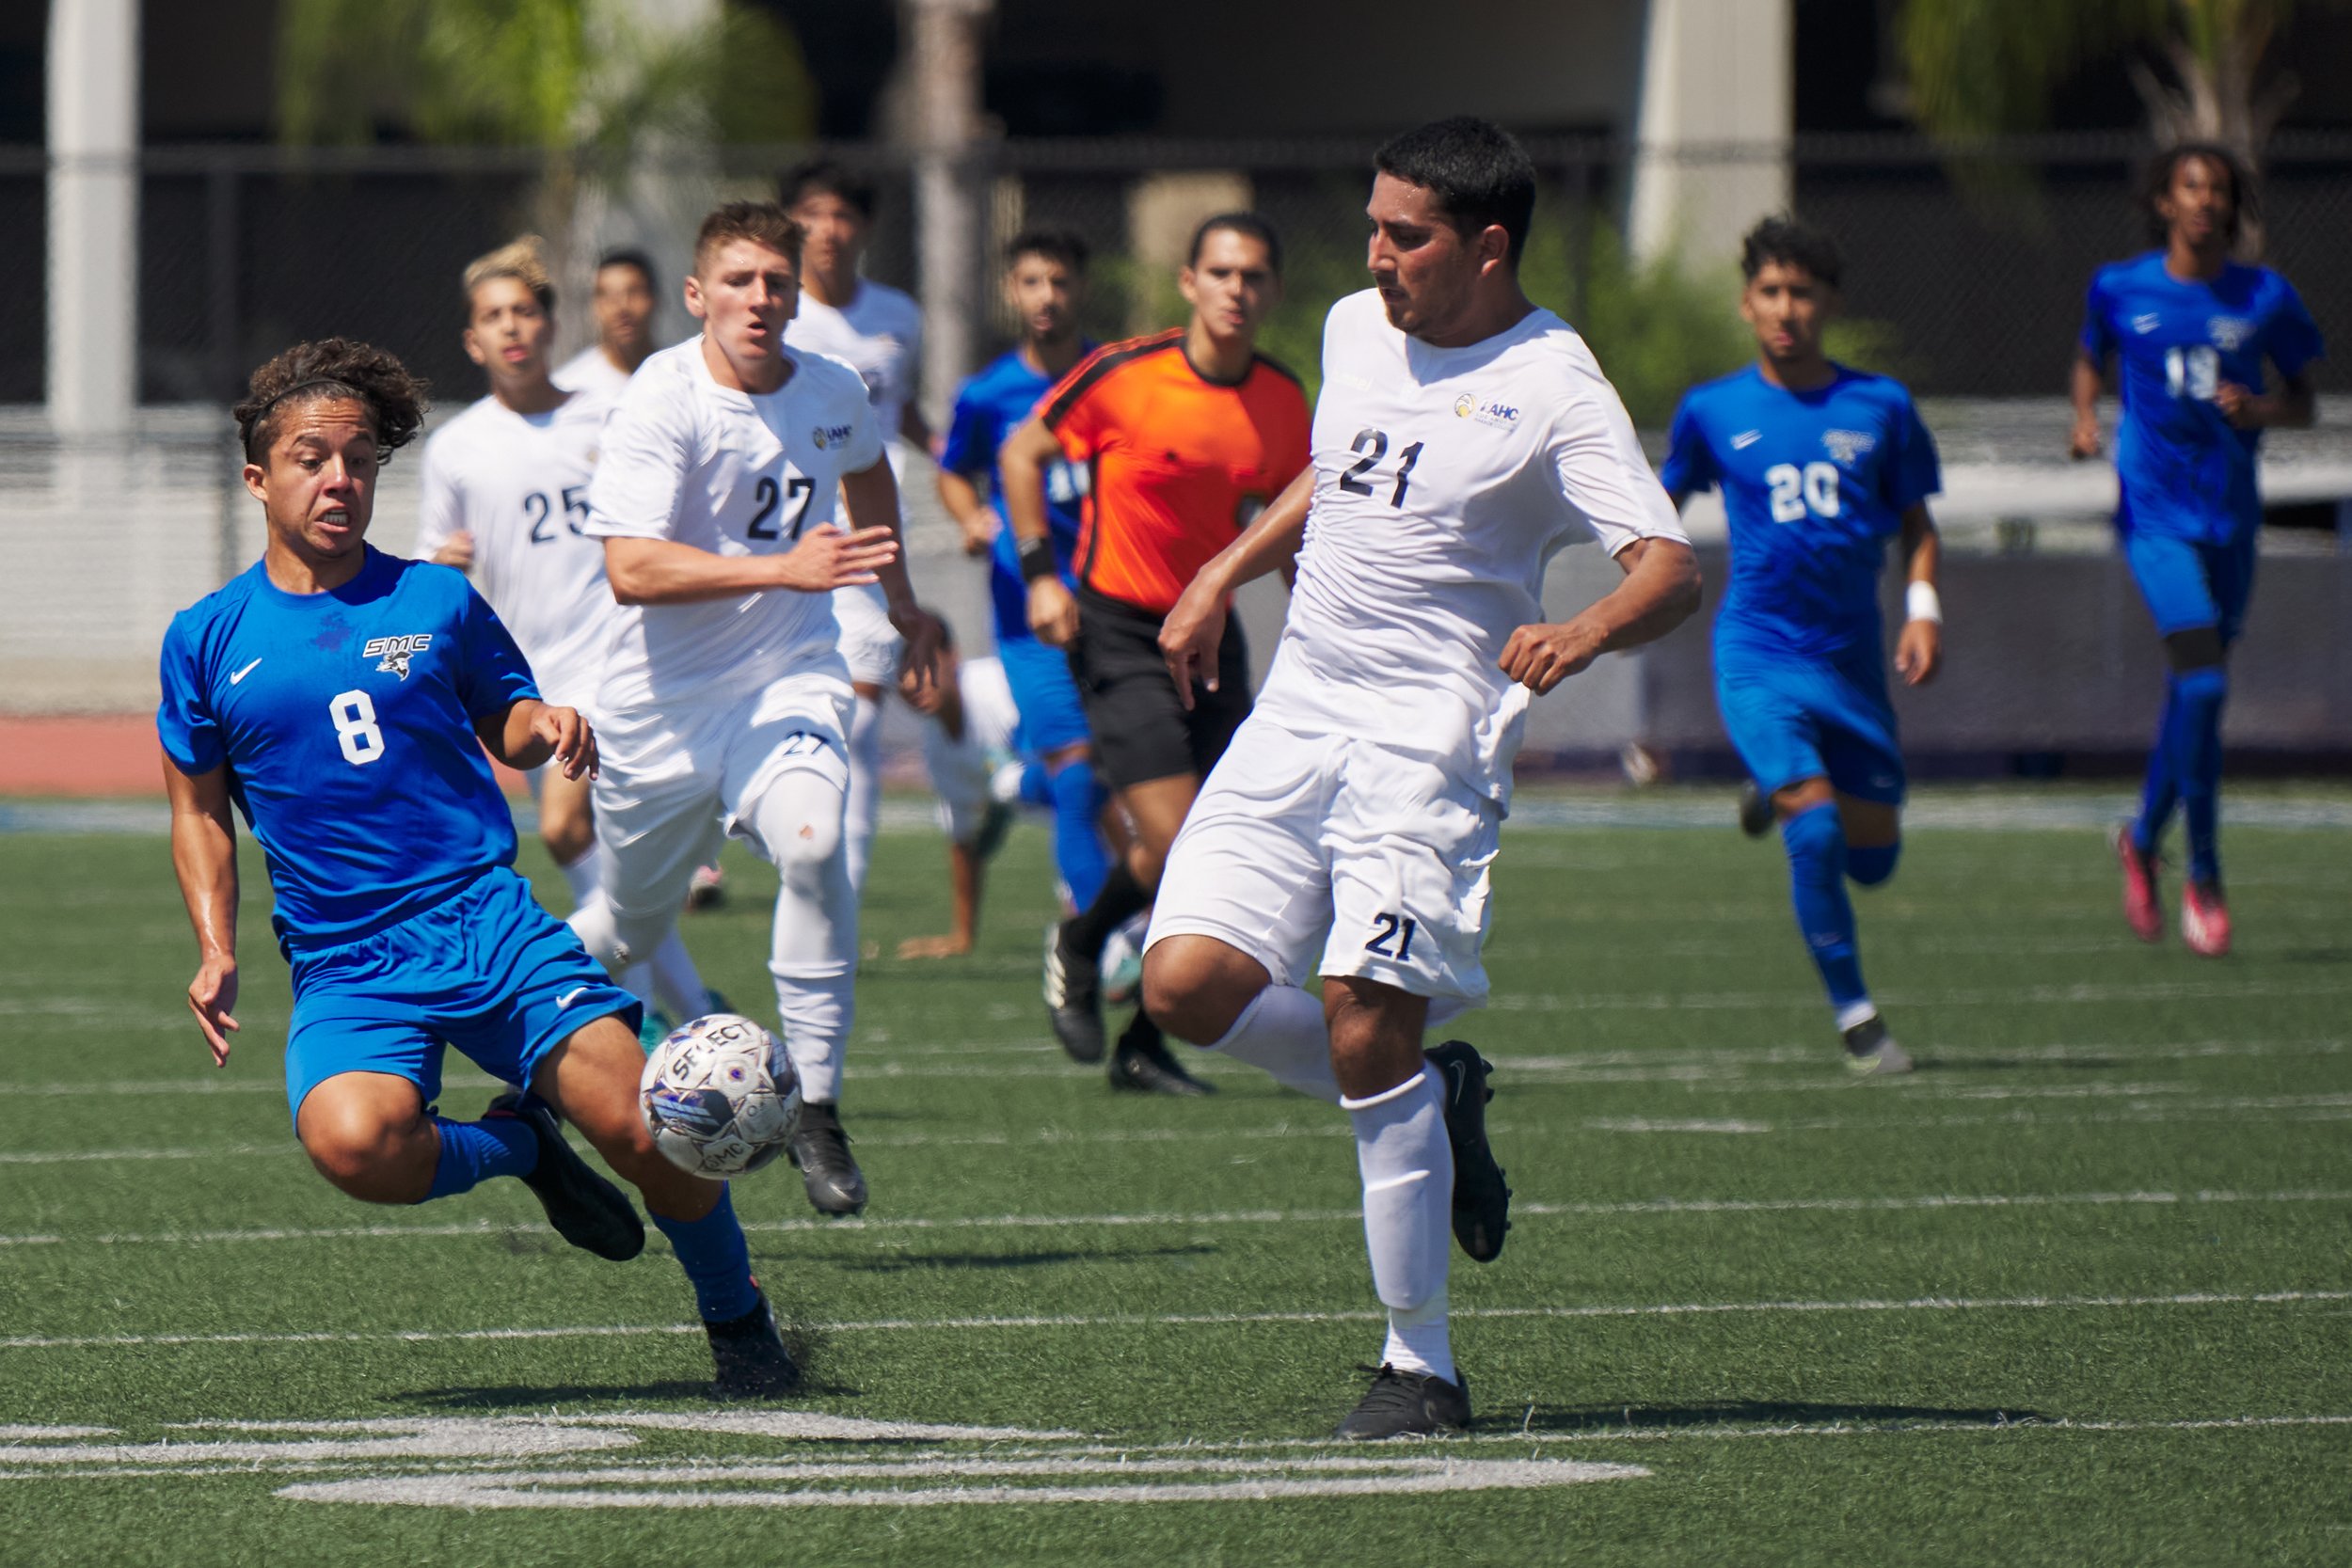  Los Angeles Harbor College Seahawks' Jesus Torres (21) winds up to kick the ball away from Santa Monica College Corsairs' Michael Chavarri (8) during the men's soccer match on Friday, Sept. 9, 2023, at Corsair Field in Santa Monica, Calif. The Corsa